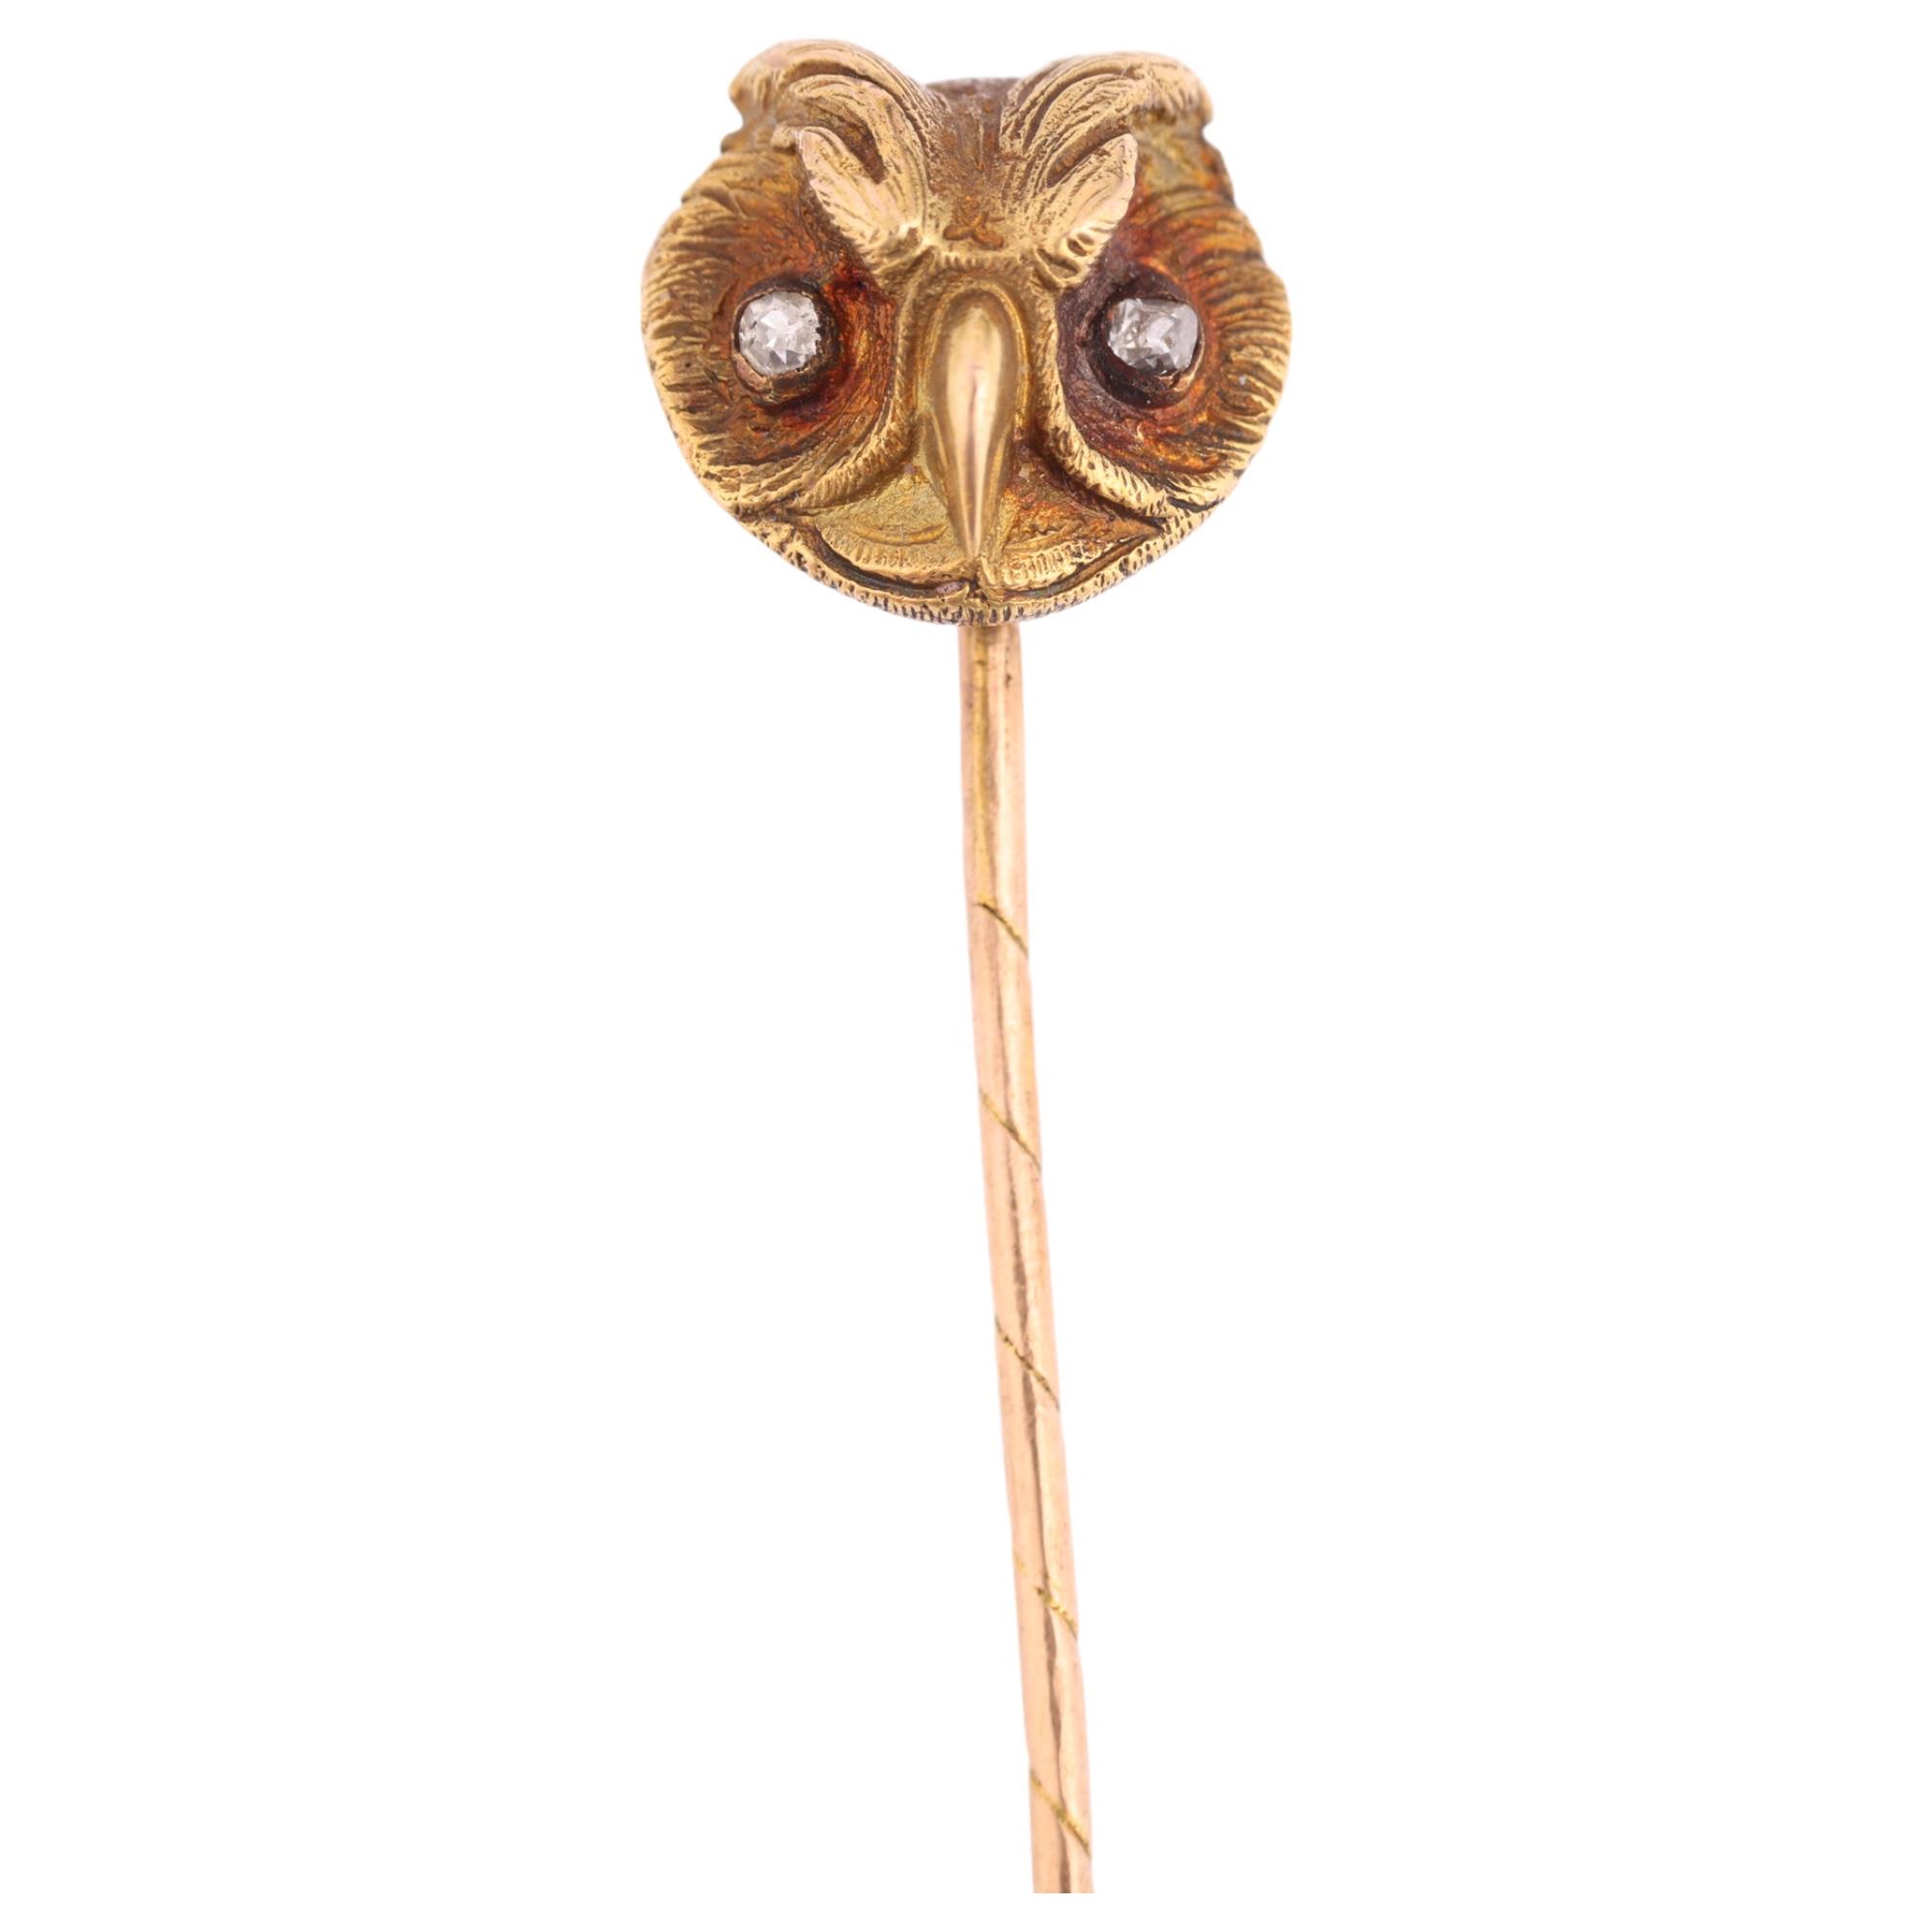 ATTRIBUTED TO PAUL ROBIN - a French 18ct gold diamond owl mask stickpin, circa 1880, modelled as